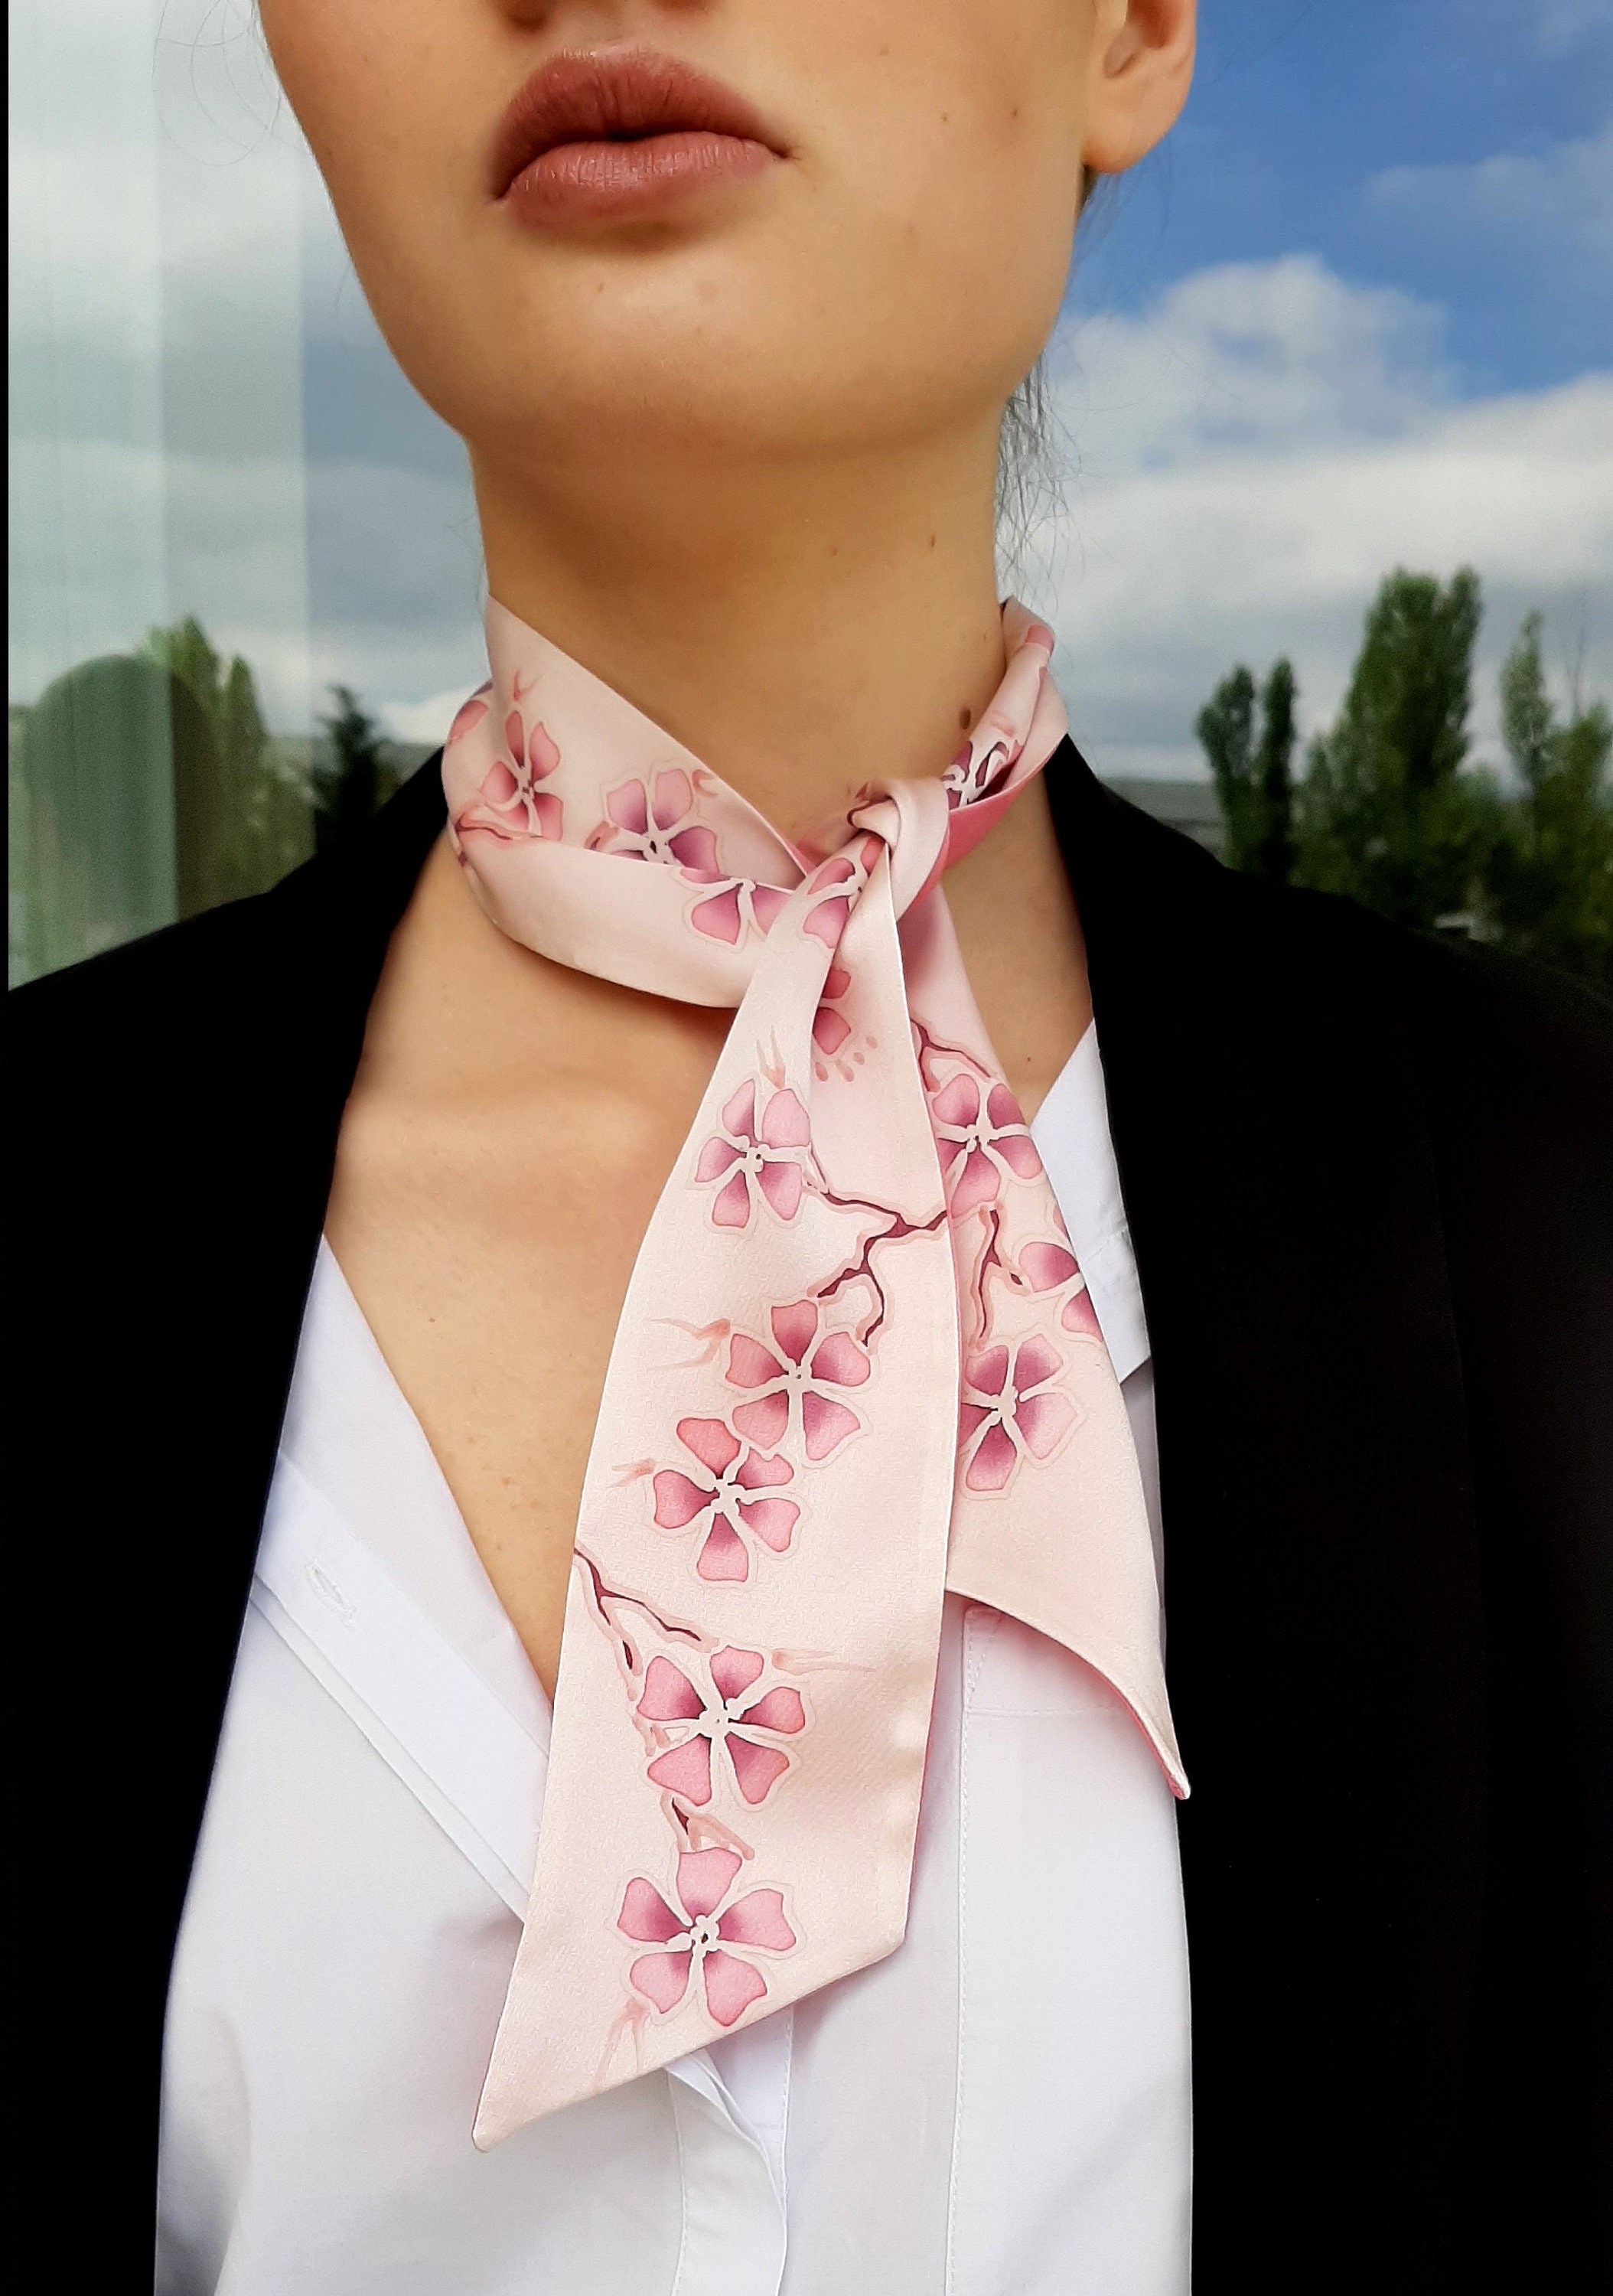 Japanese Floral Print Twilly Scarf, Neck Bow, Neck Tie – Multi Chic